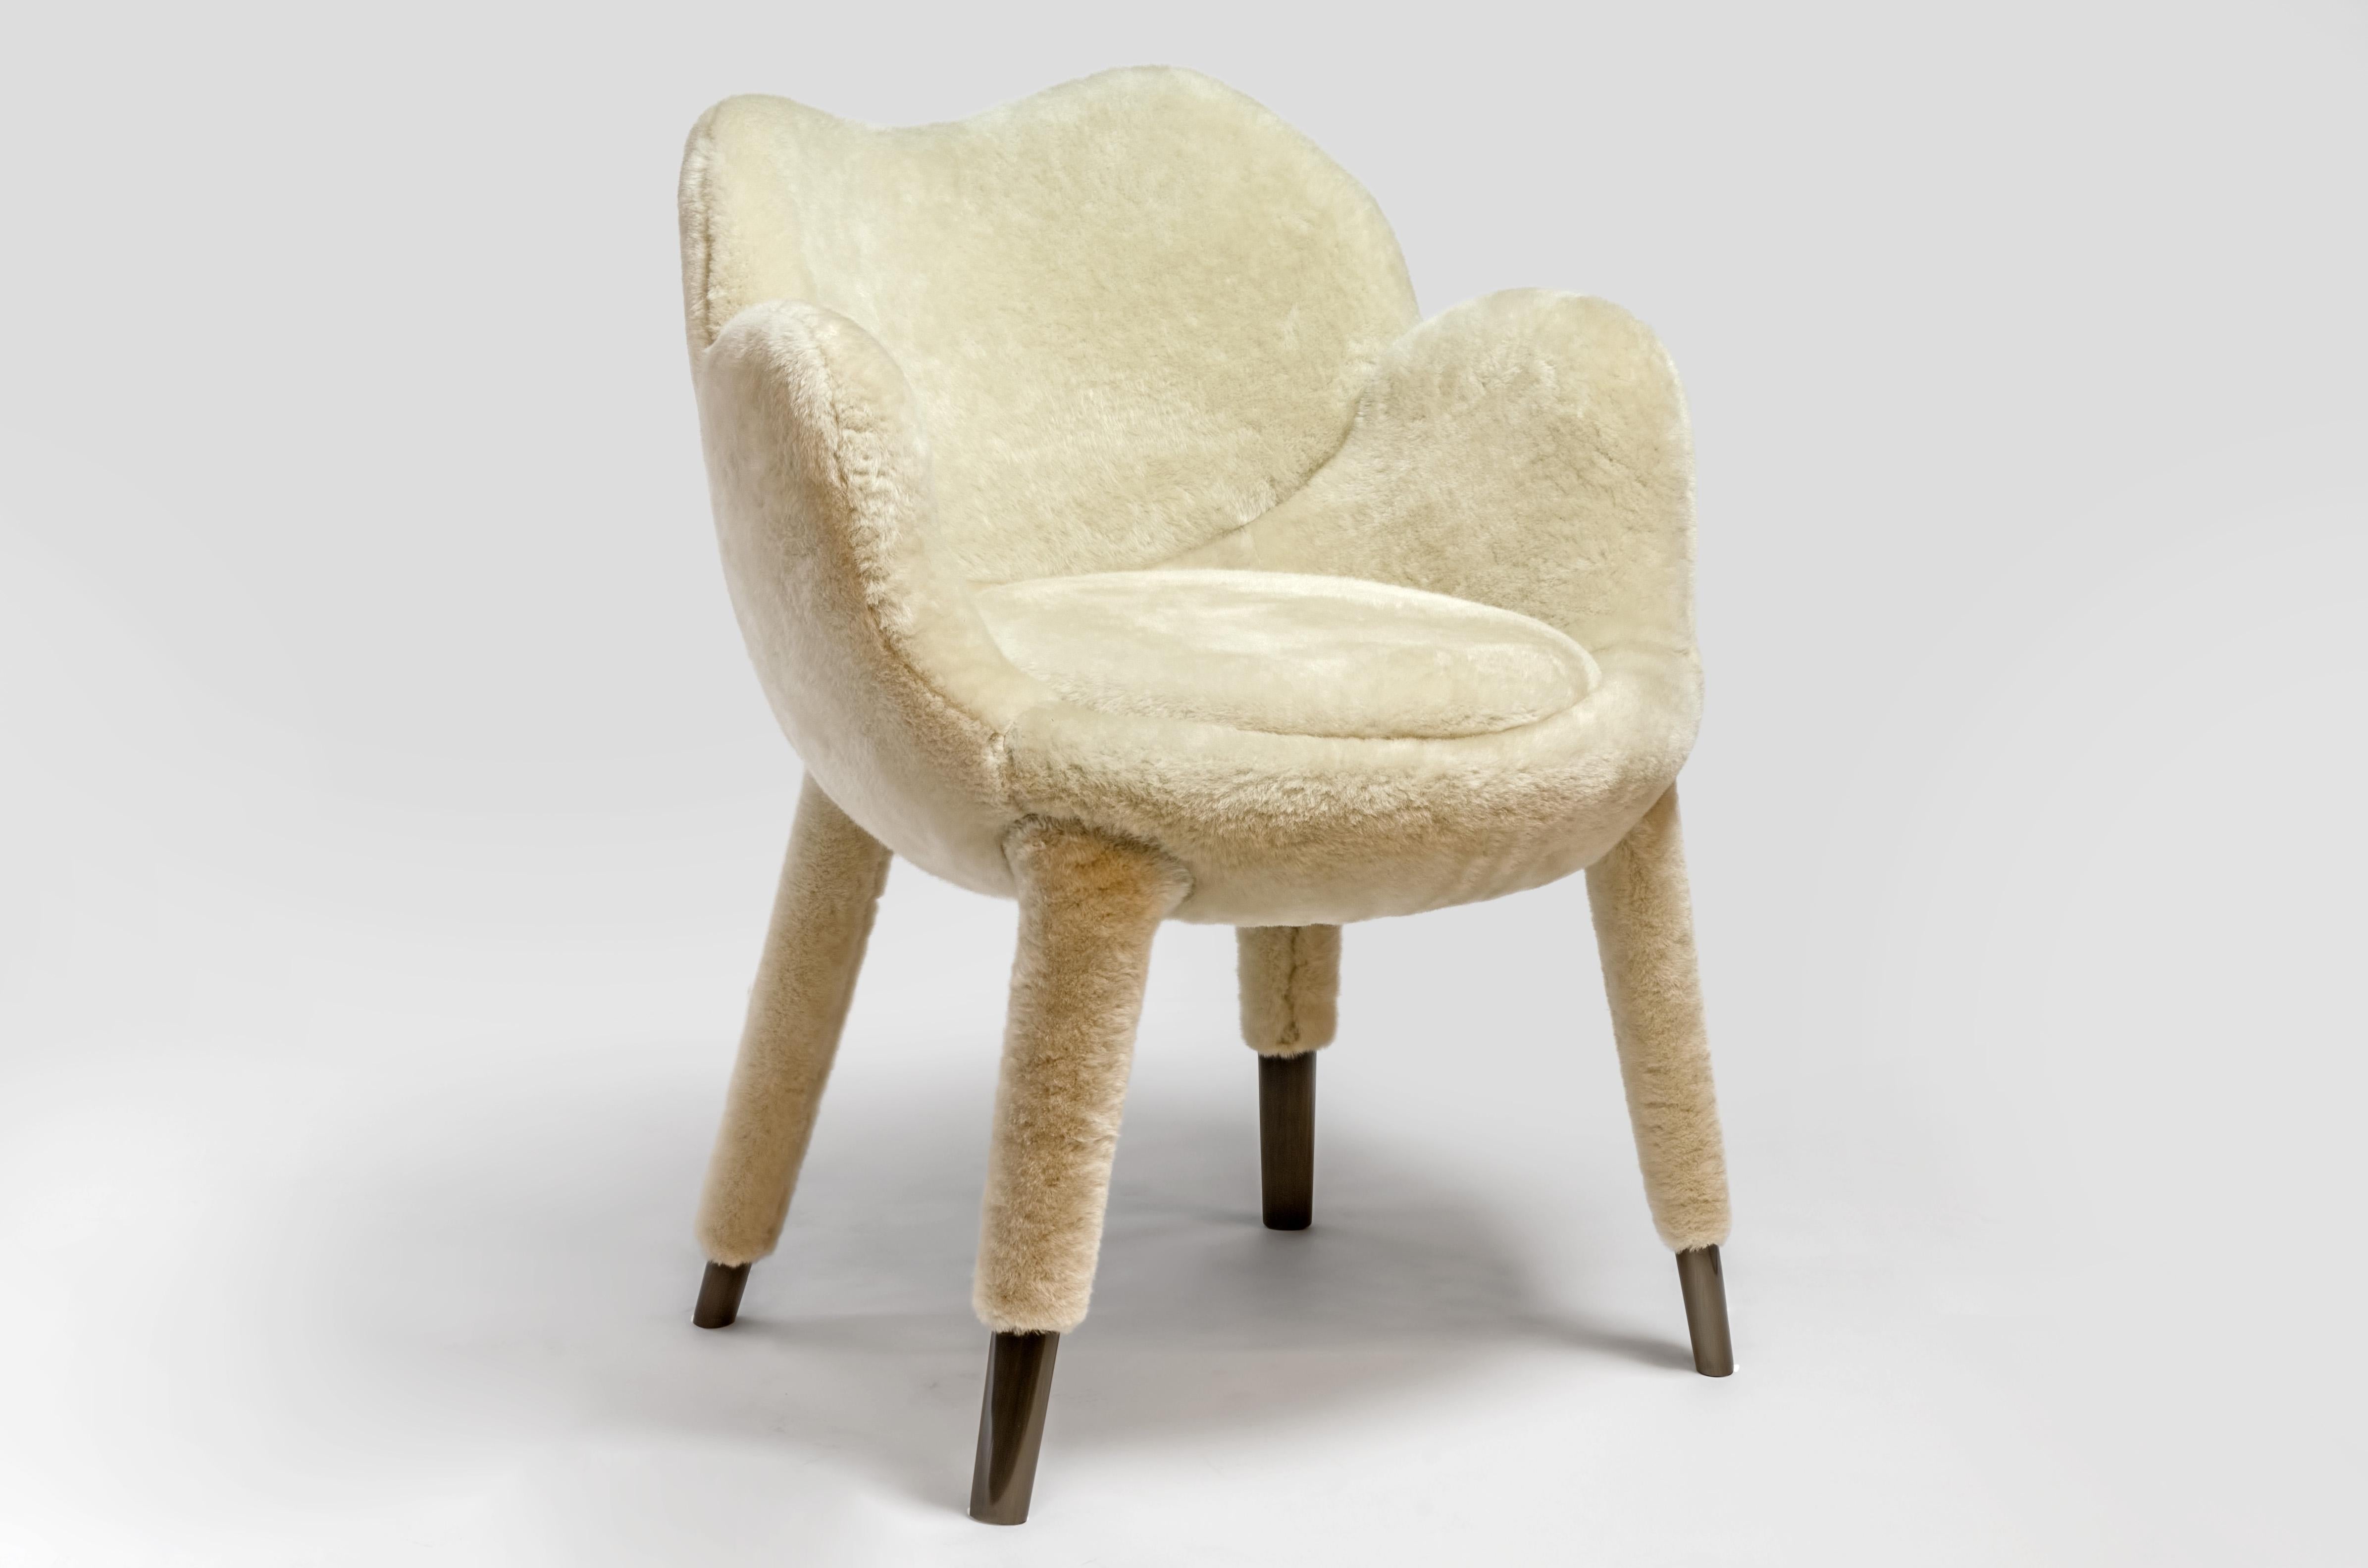 An elegant chair designed to break up the static nature of a table setting where all the chairs backs usually create a fixed line above the table surface. The backs of each of these chairs are formed from different organic shapes, taking their cues